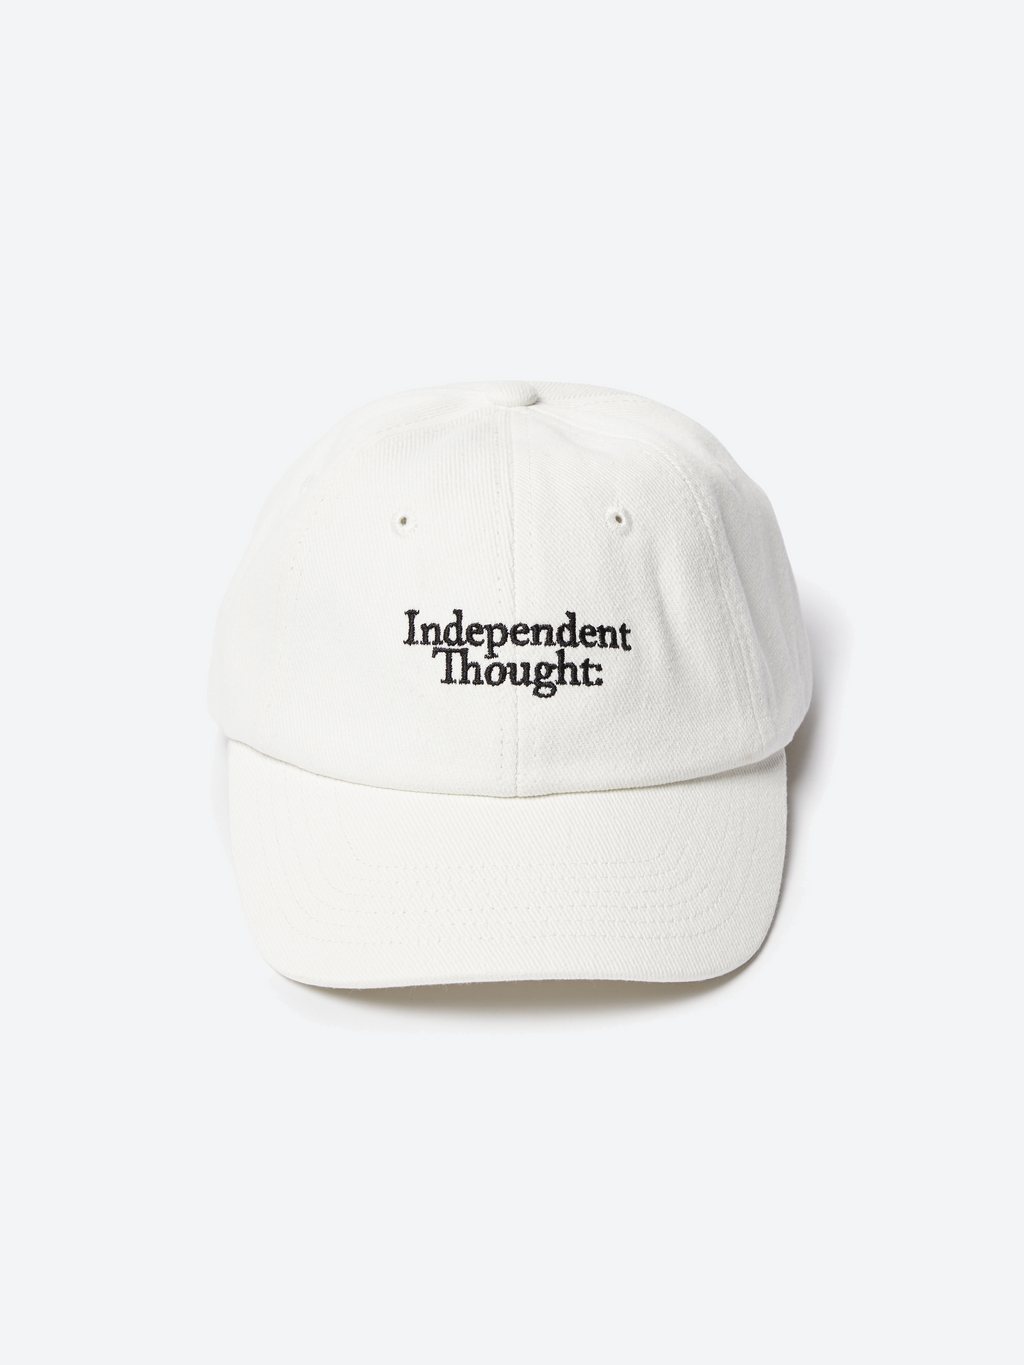 Independent Thought: 6-Panel - White